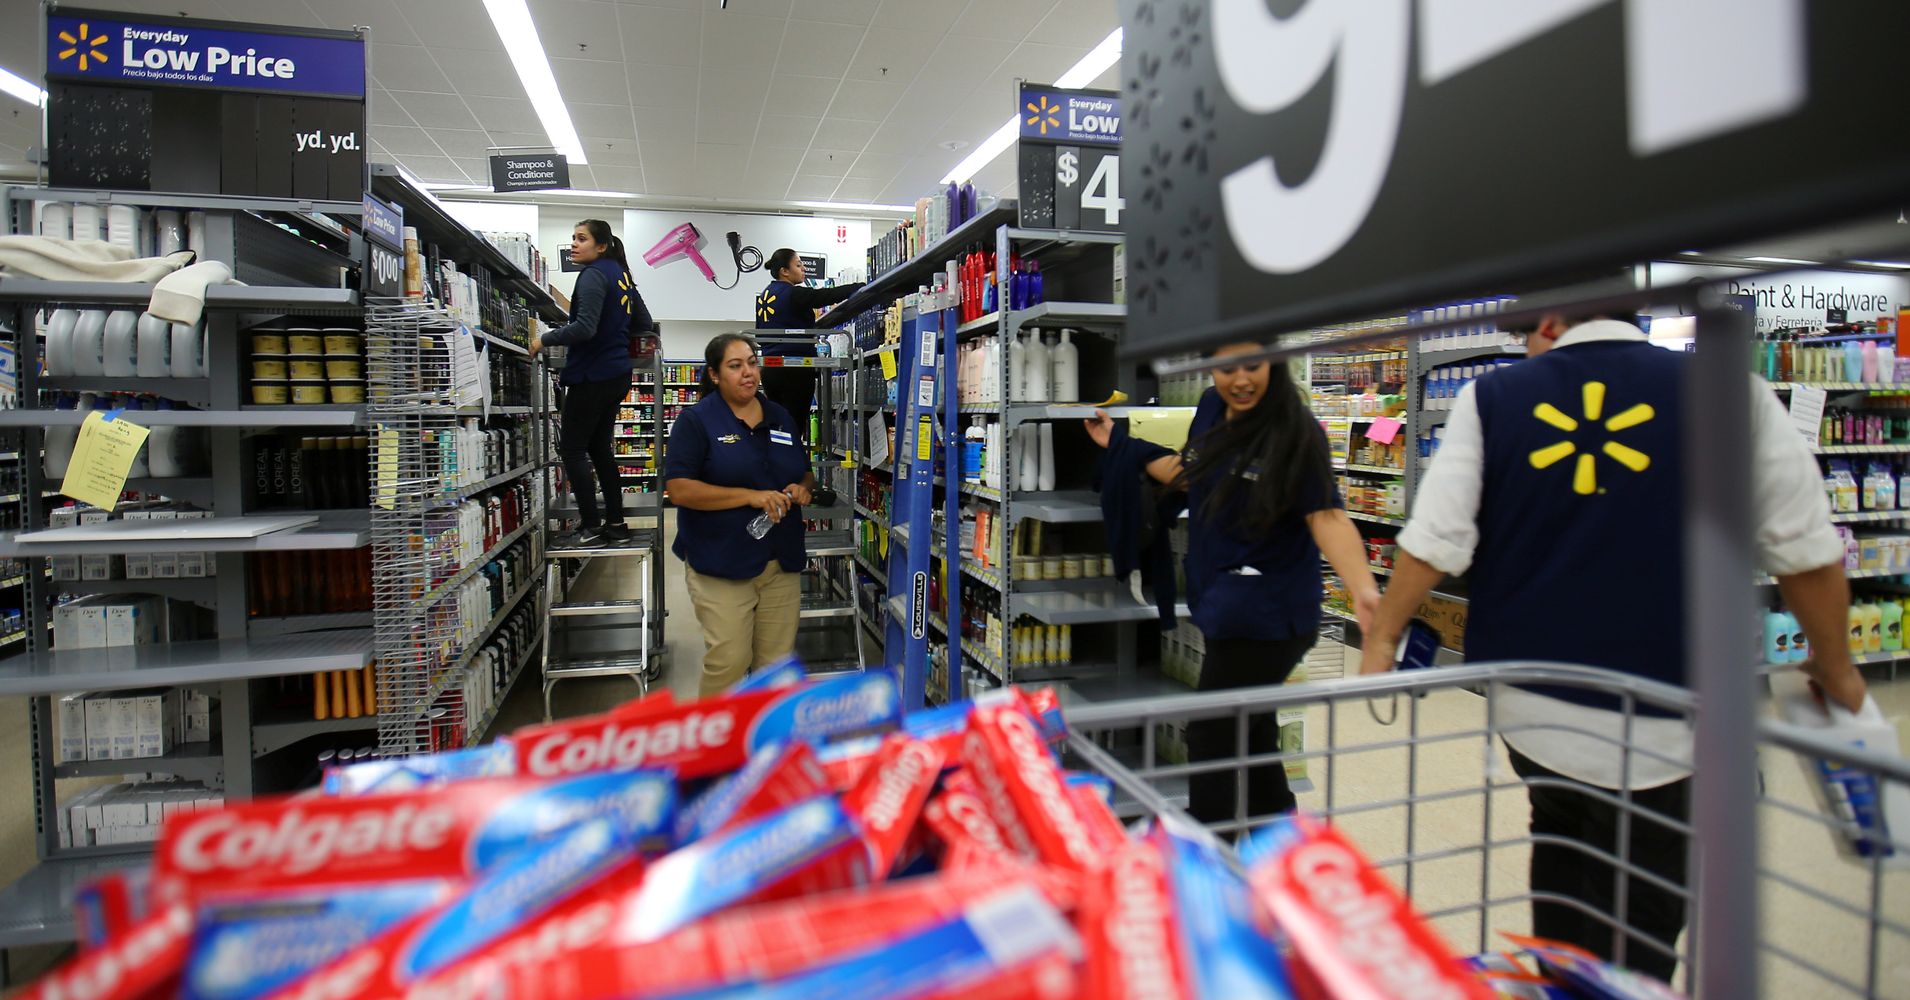 Walmart Is Cutting Back Some Employees' Hours After Raising Wages